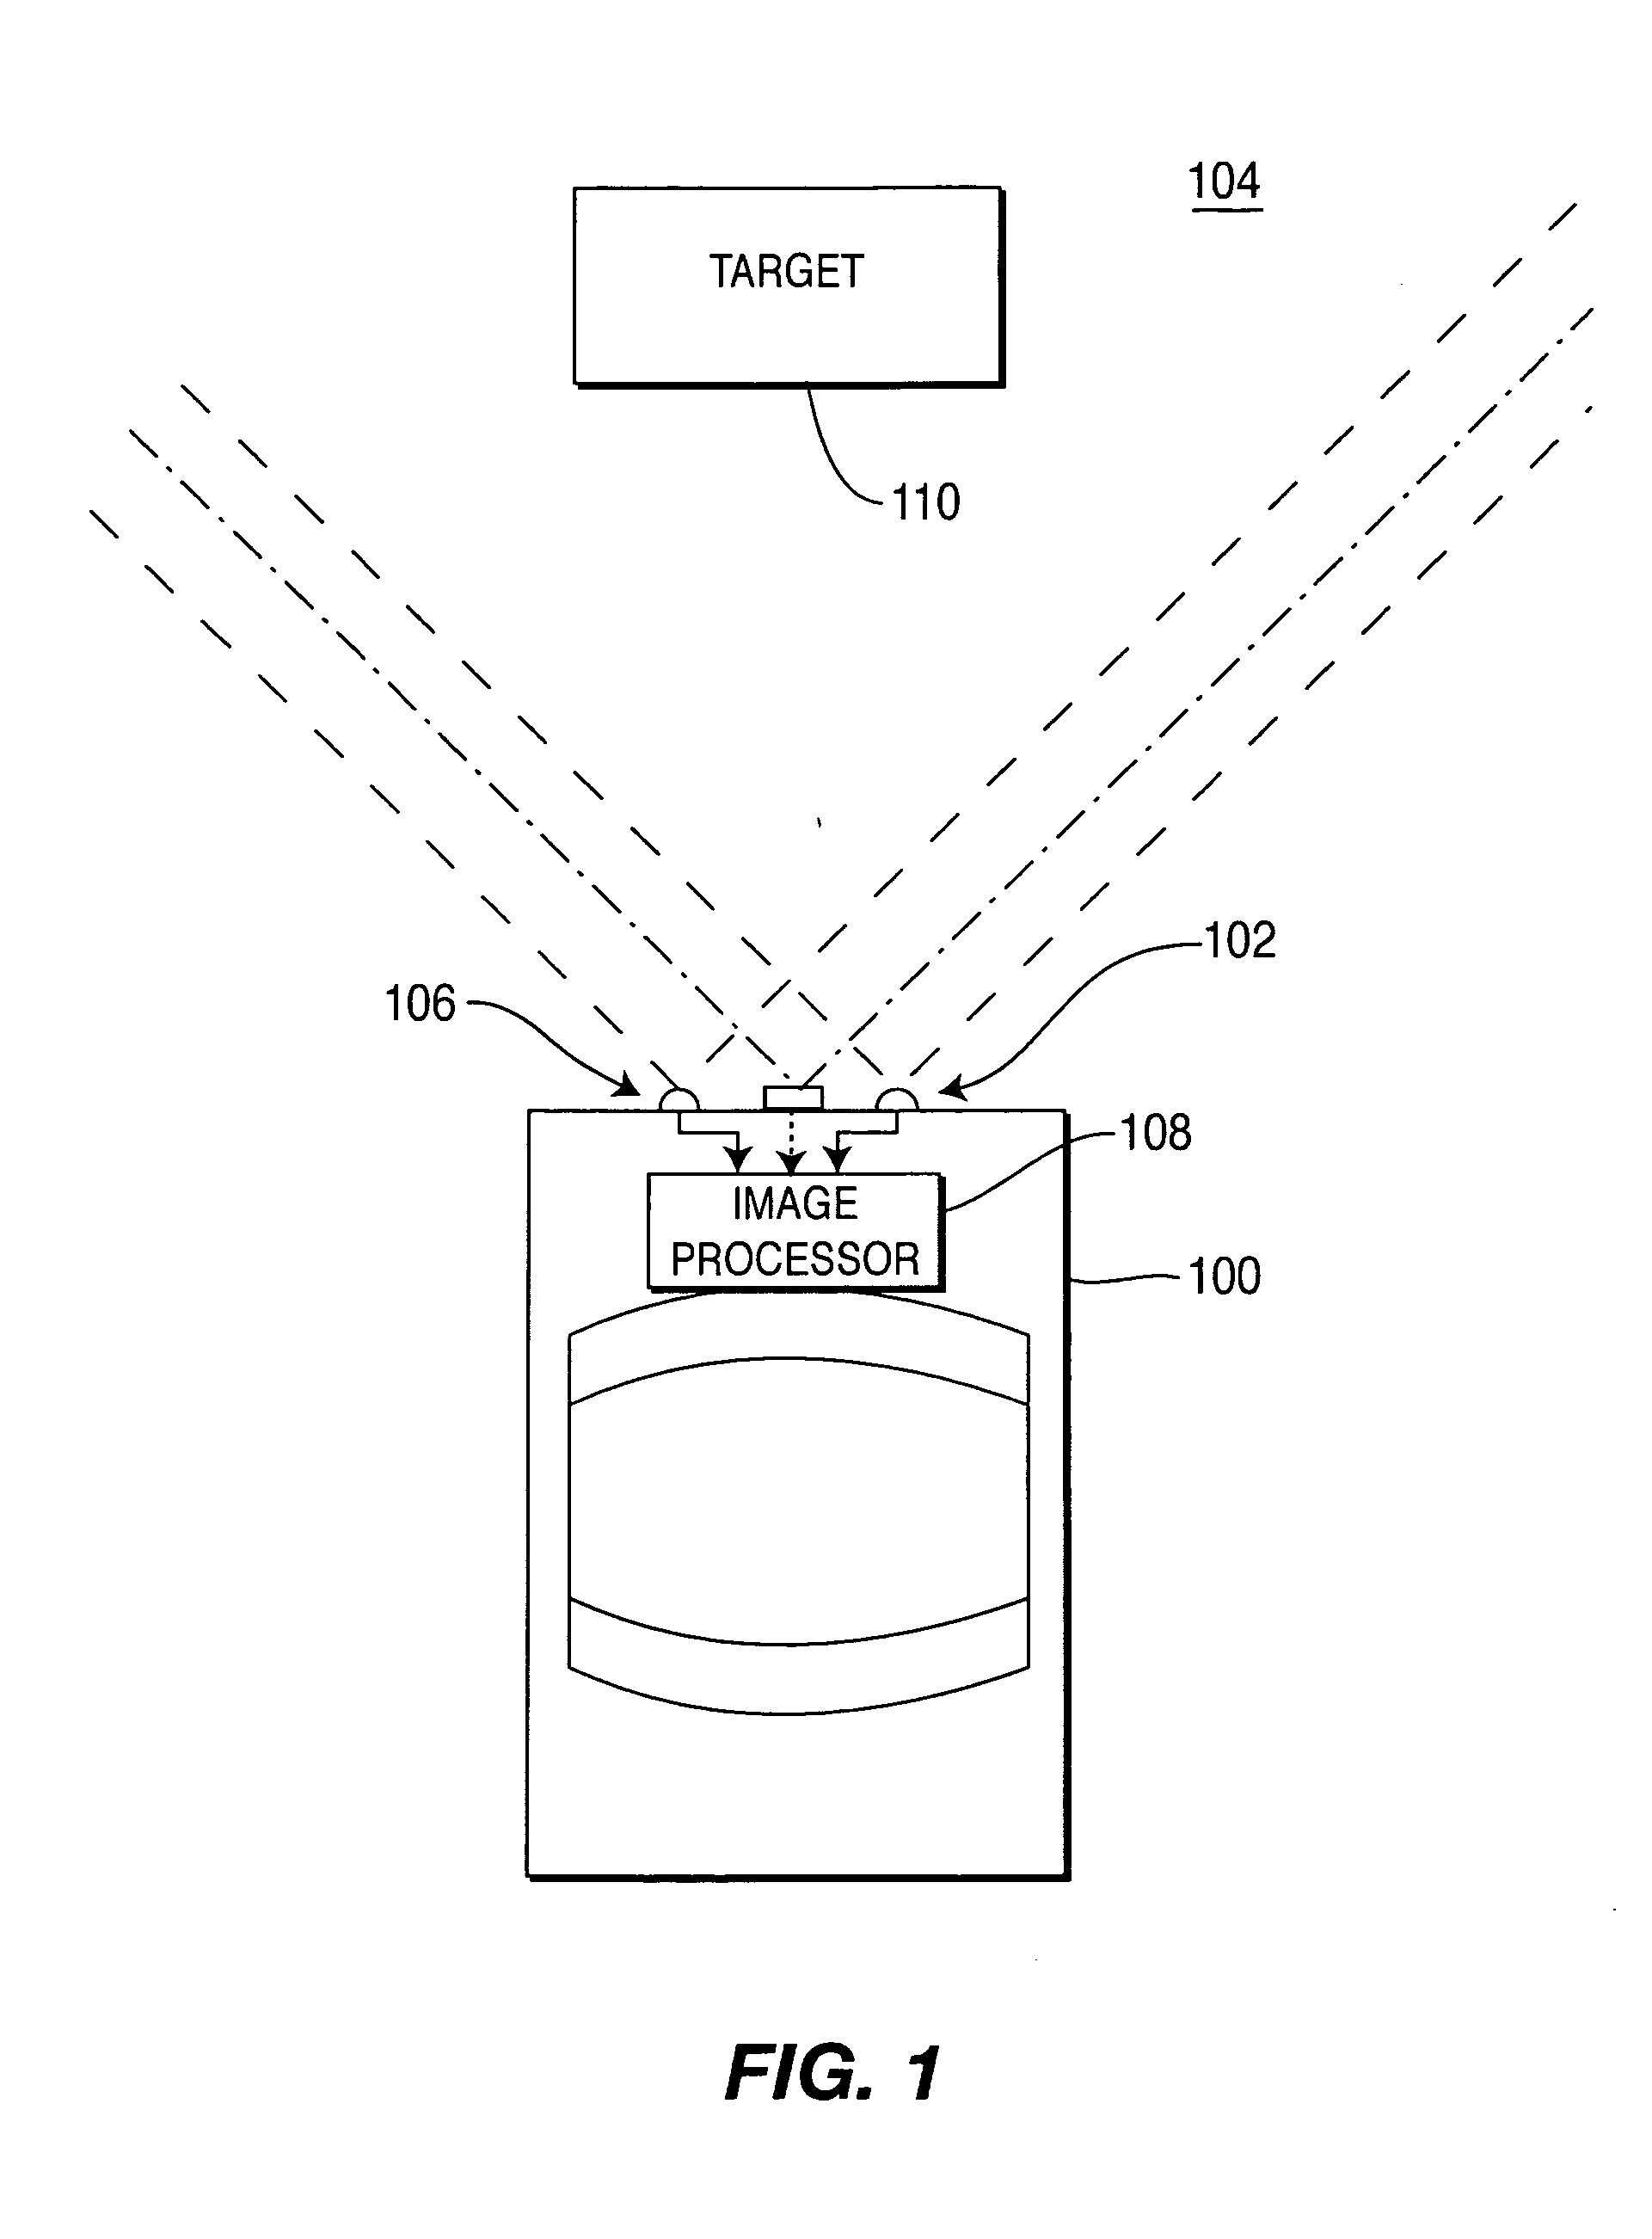 Method and apparatus for differentiating pedestrians, vehicles, and other objects